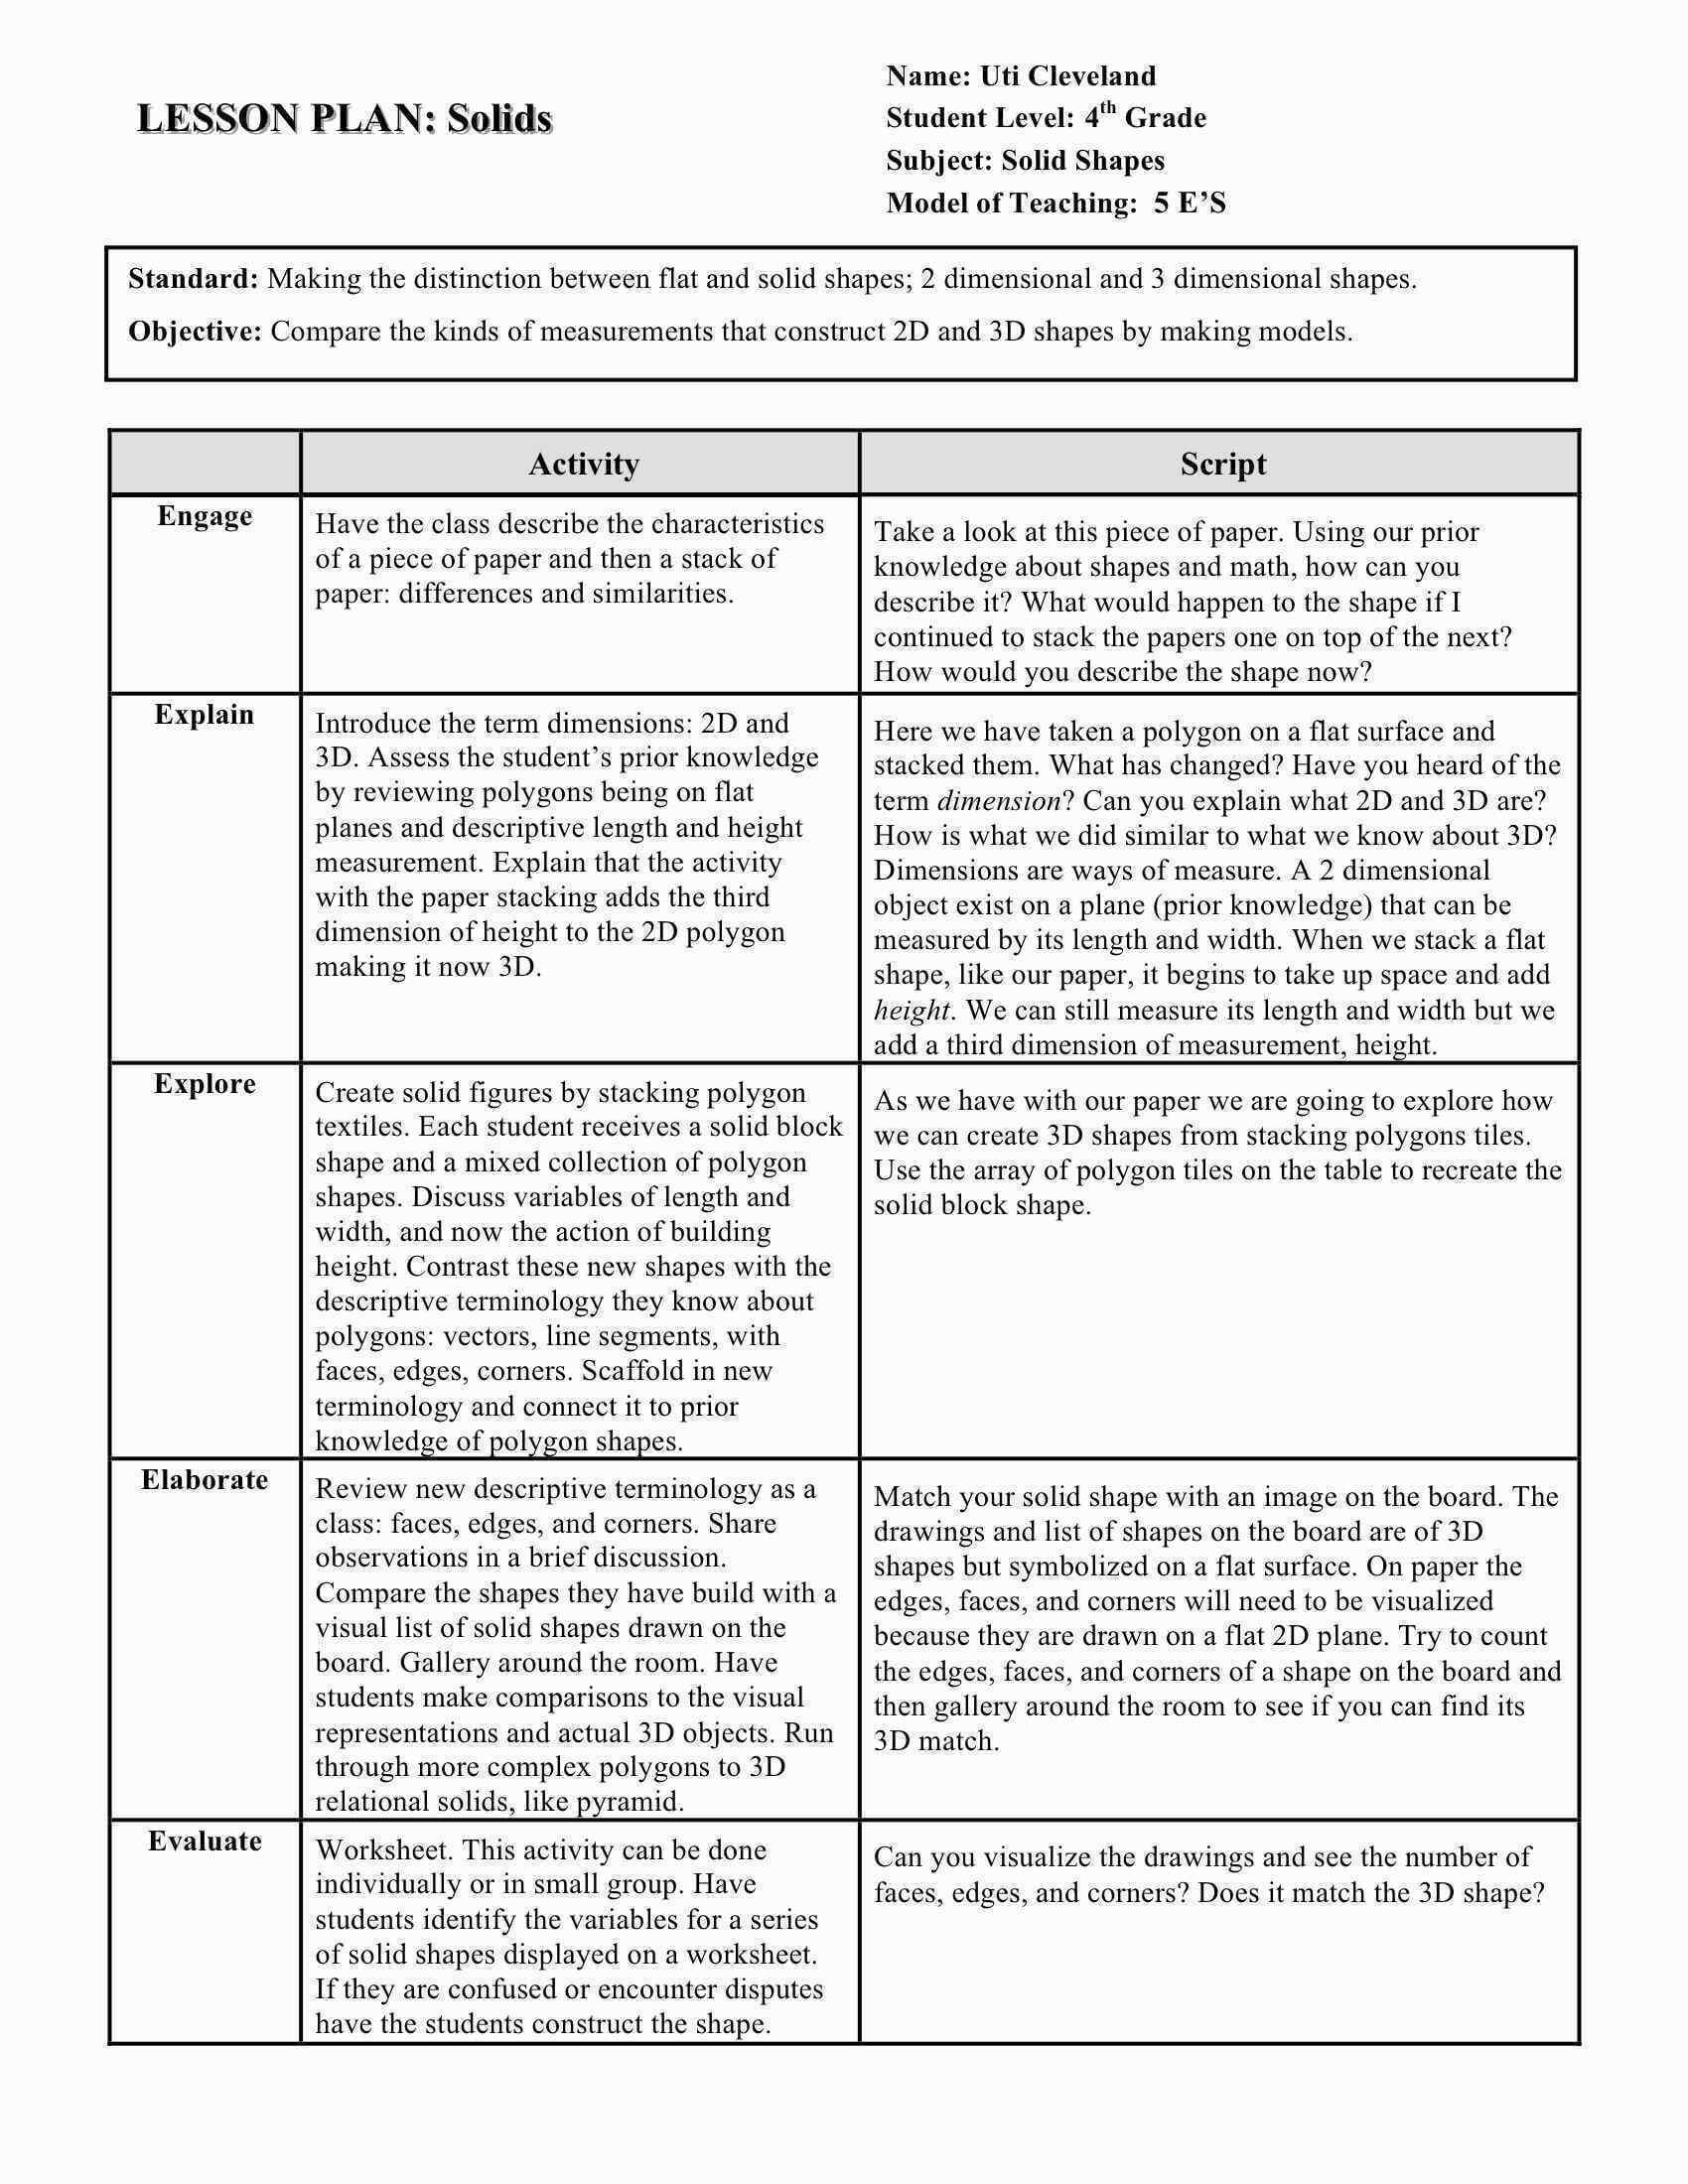 5142 5E Lesson Plan Template | Wiring Library For 5 E Lesson Plan Template